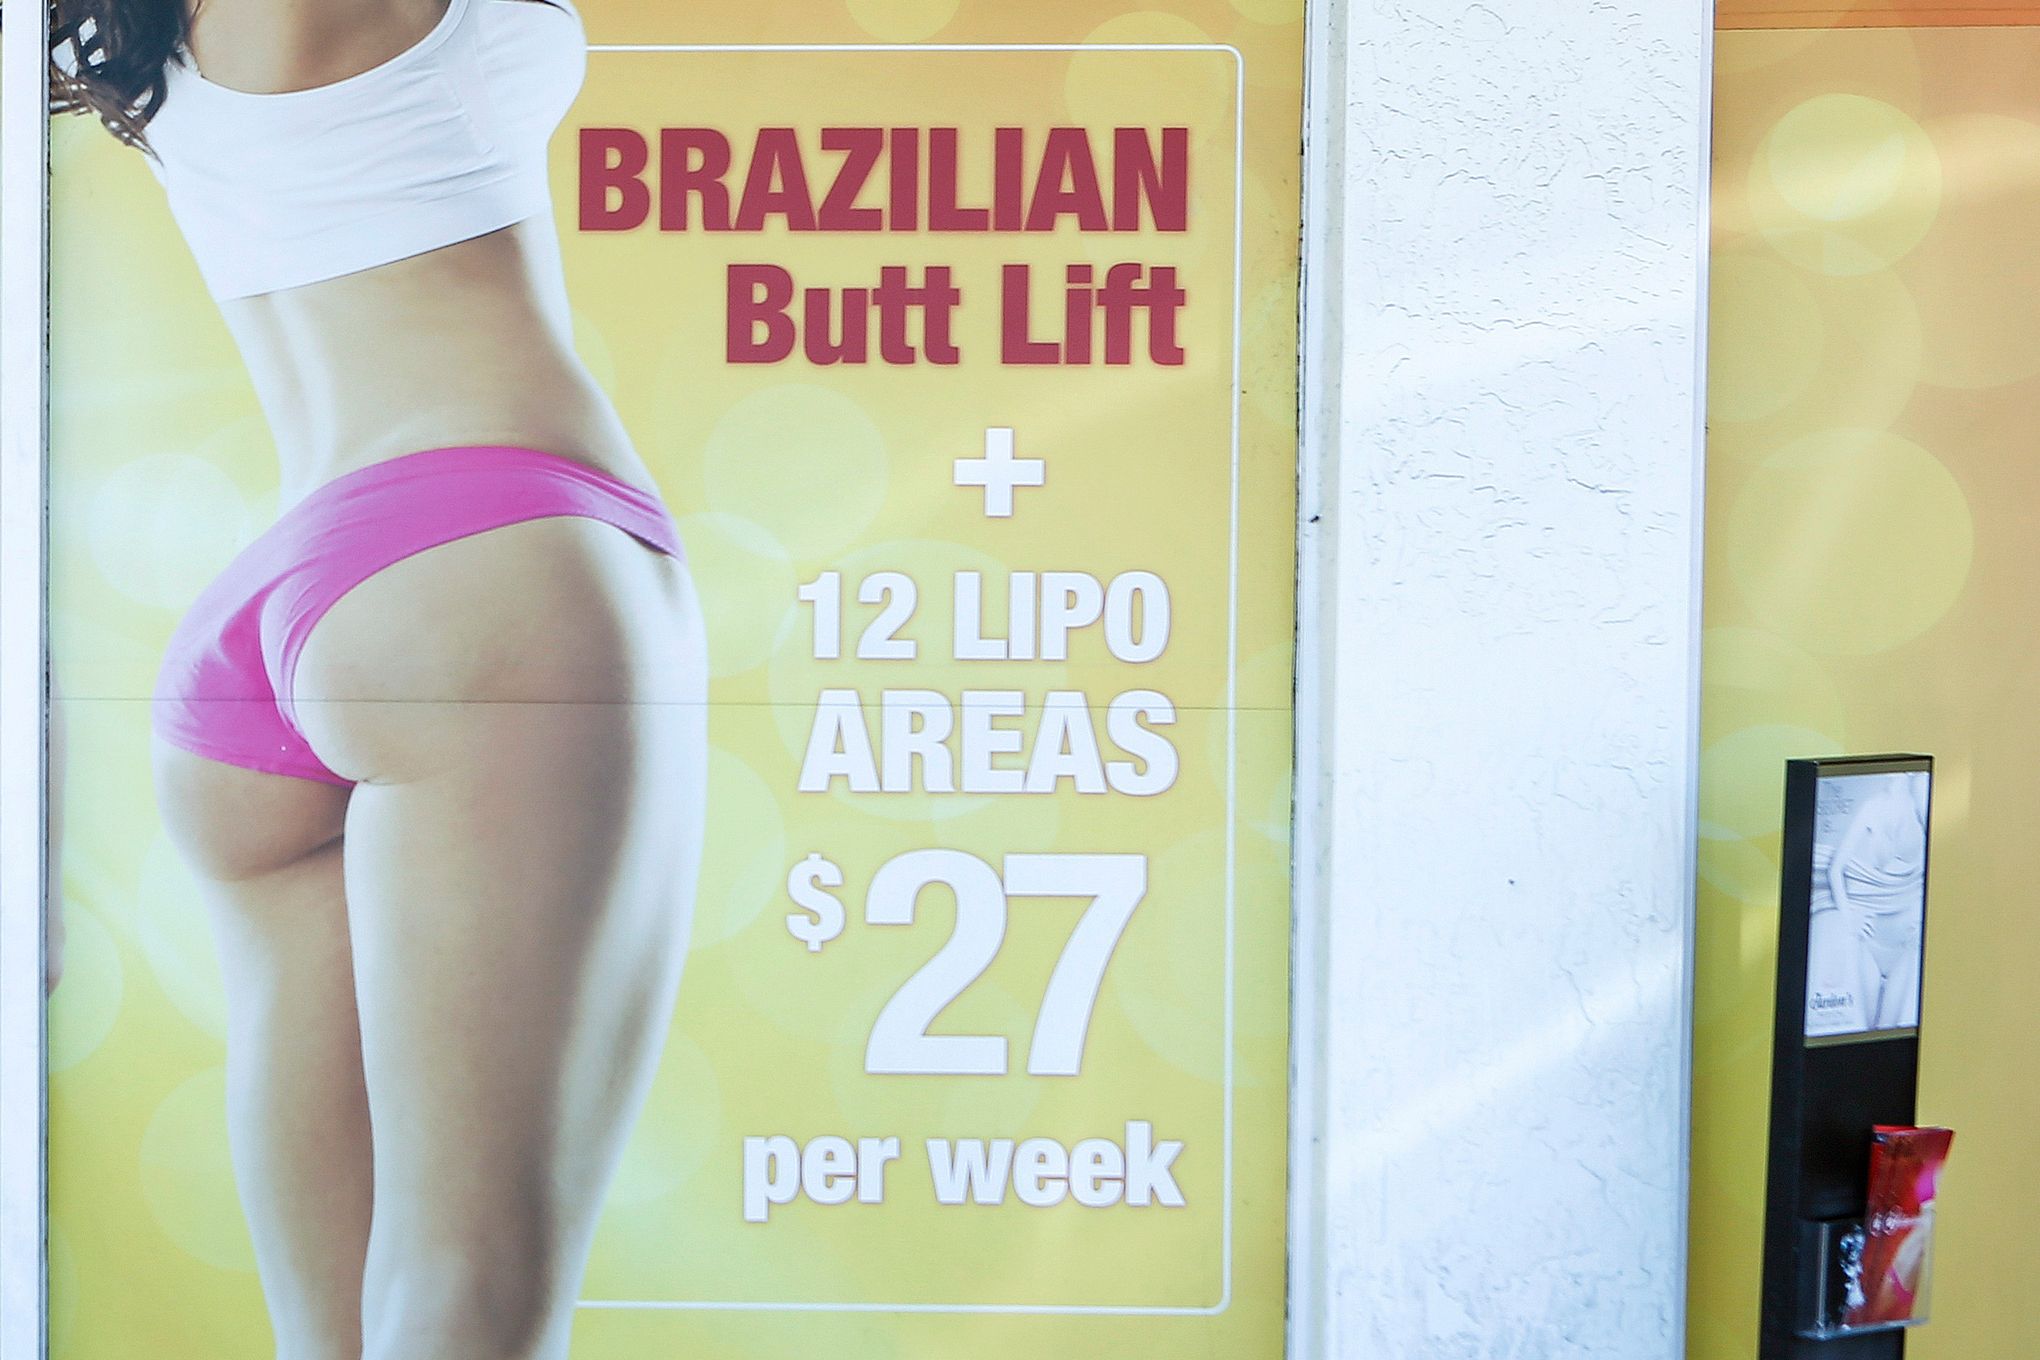 Why the Brazilian butt lift is the deadliest cosmetic surgery